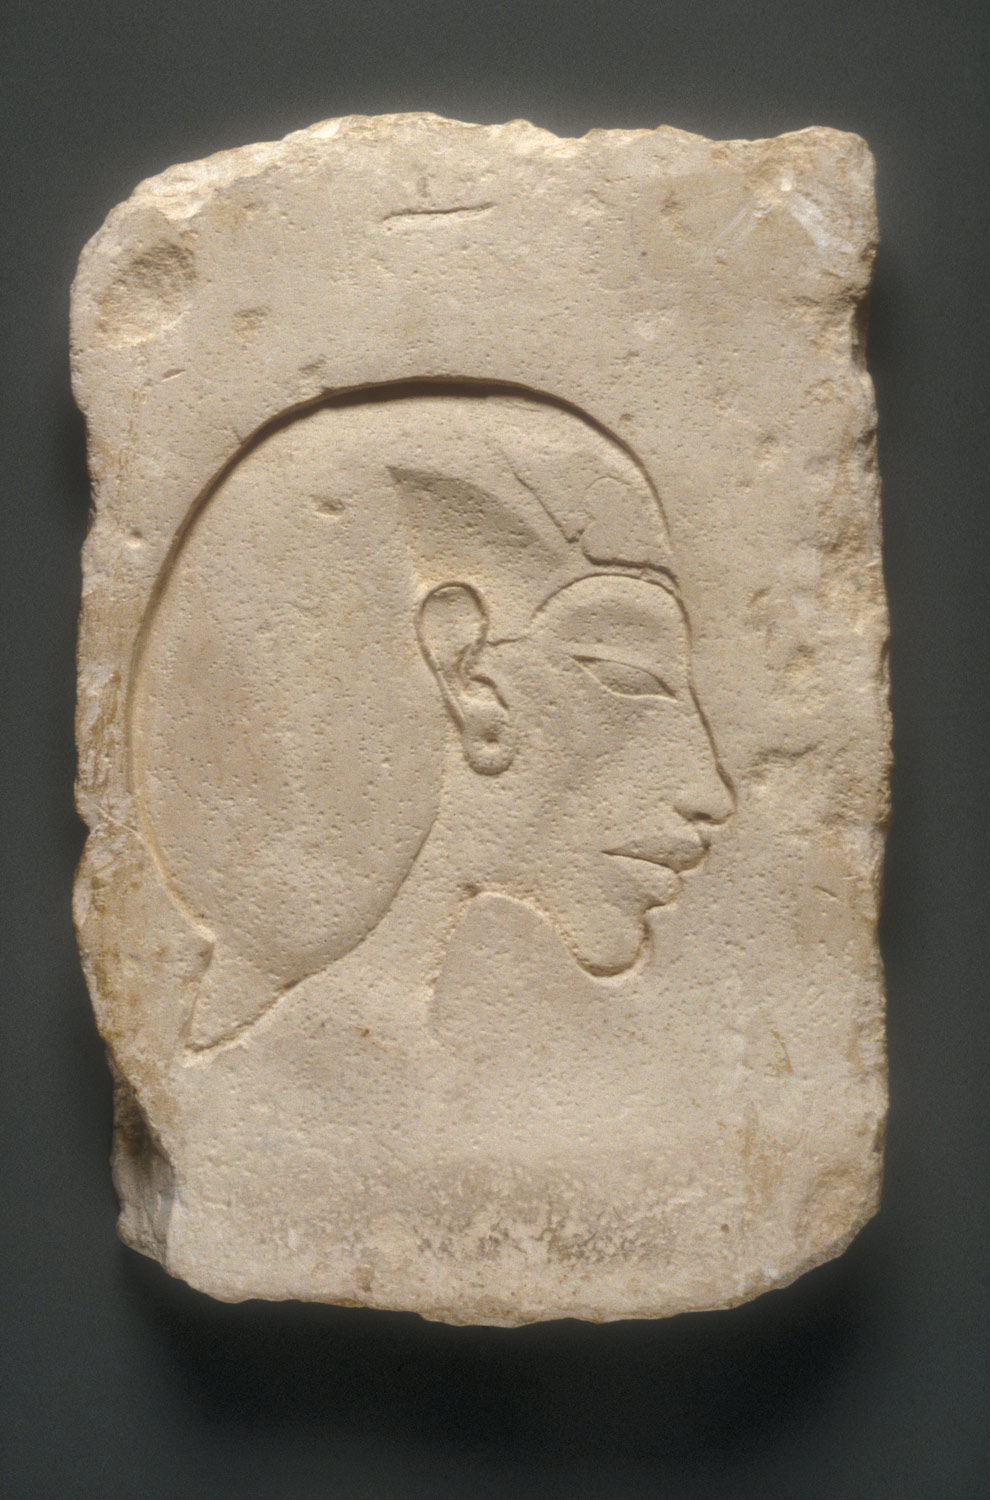 Trial Piece with Relief of Head of Akhenaten Hb_66.99.40